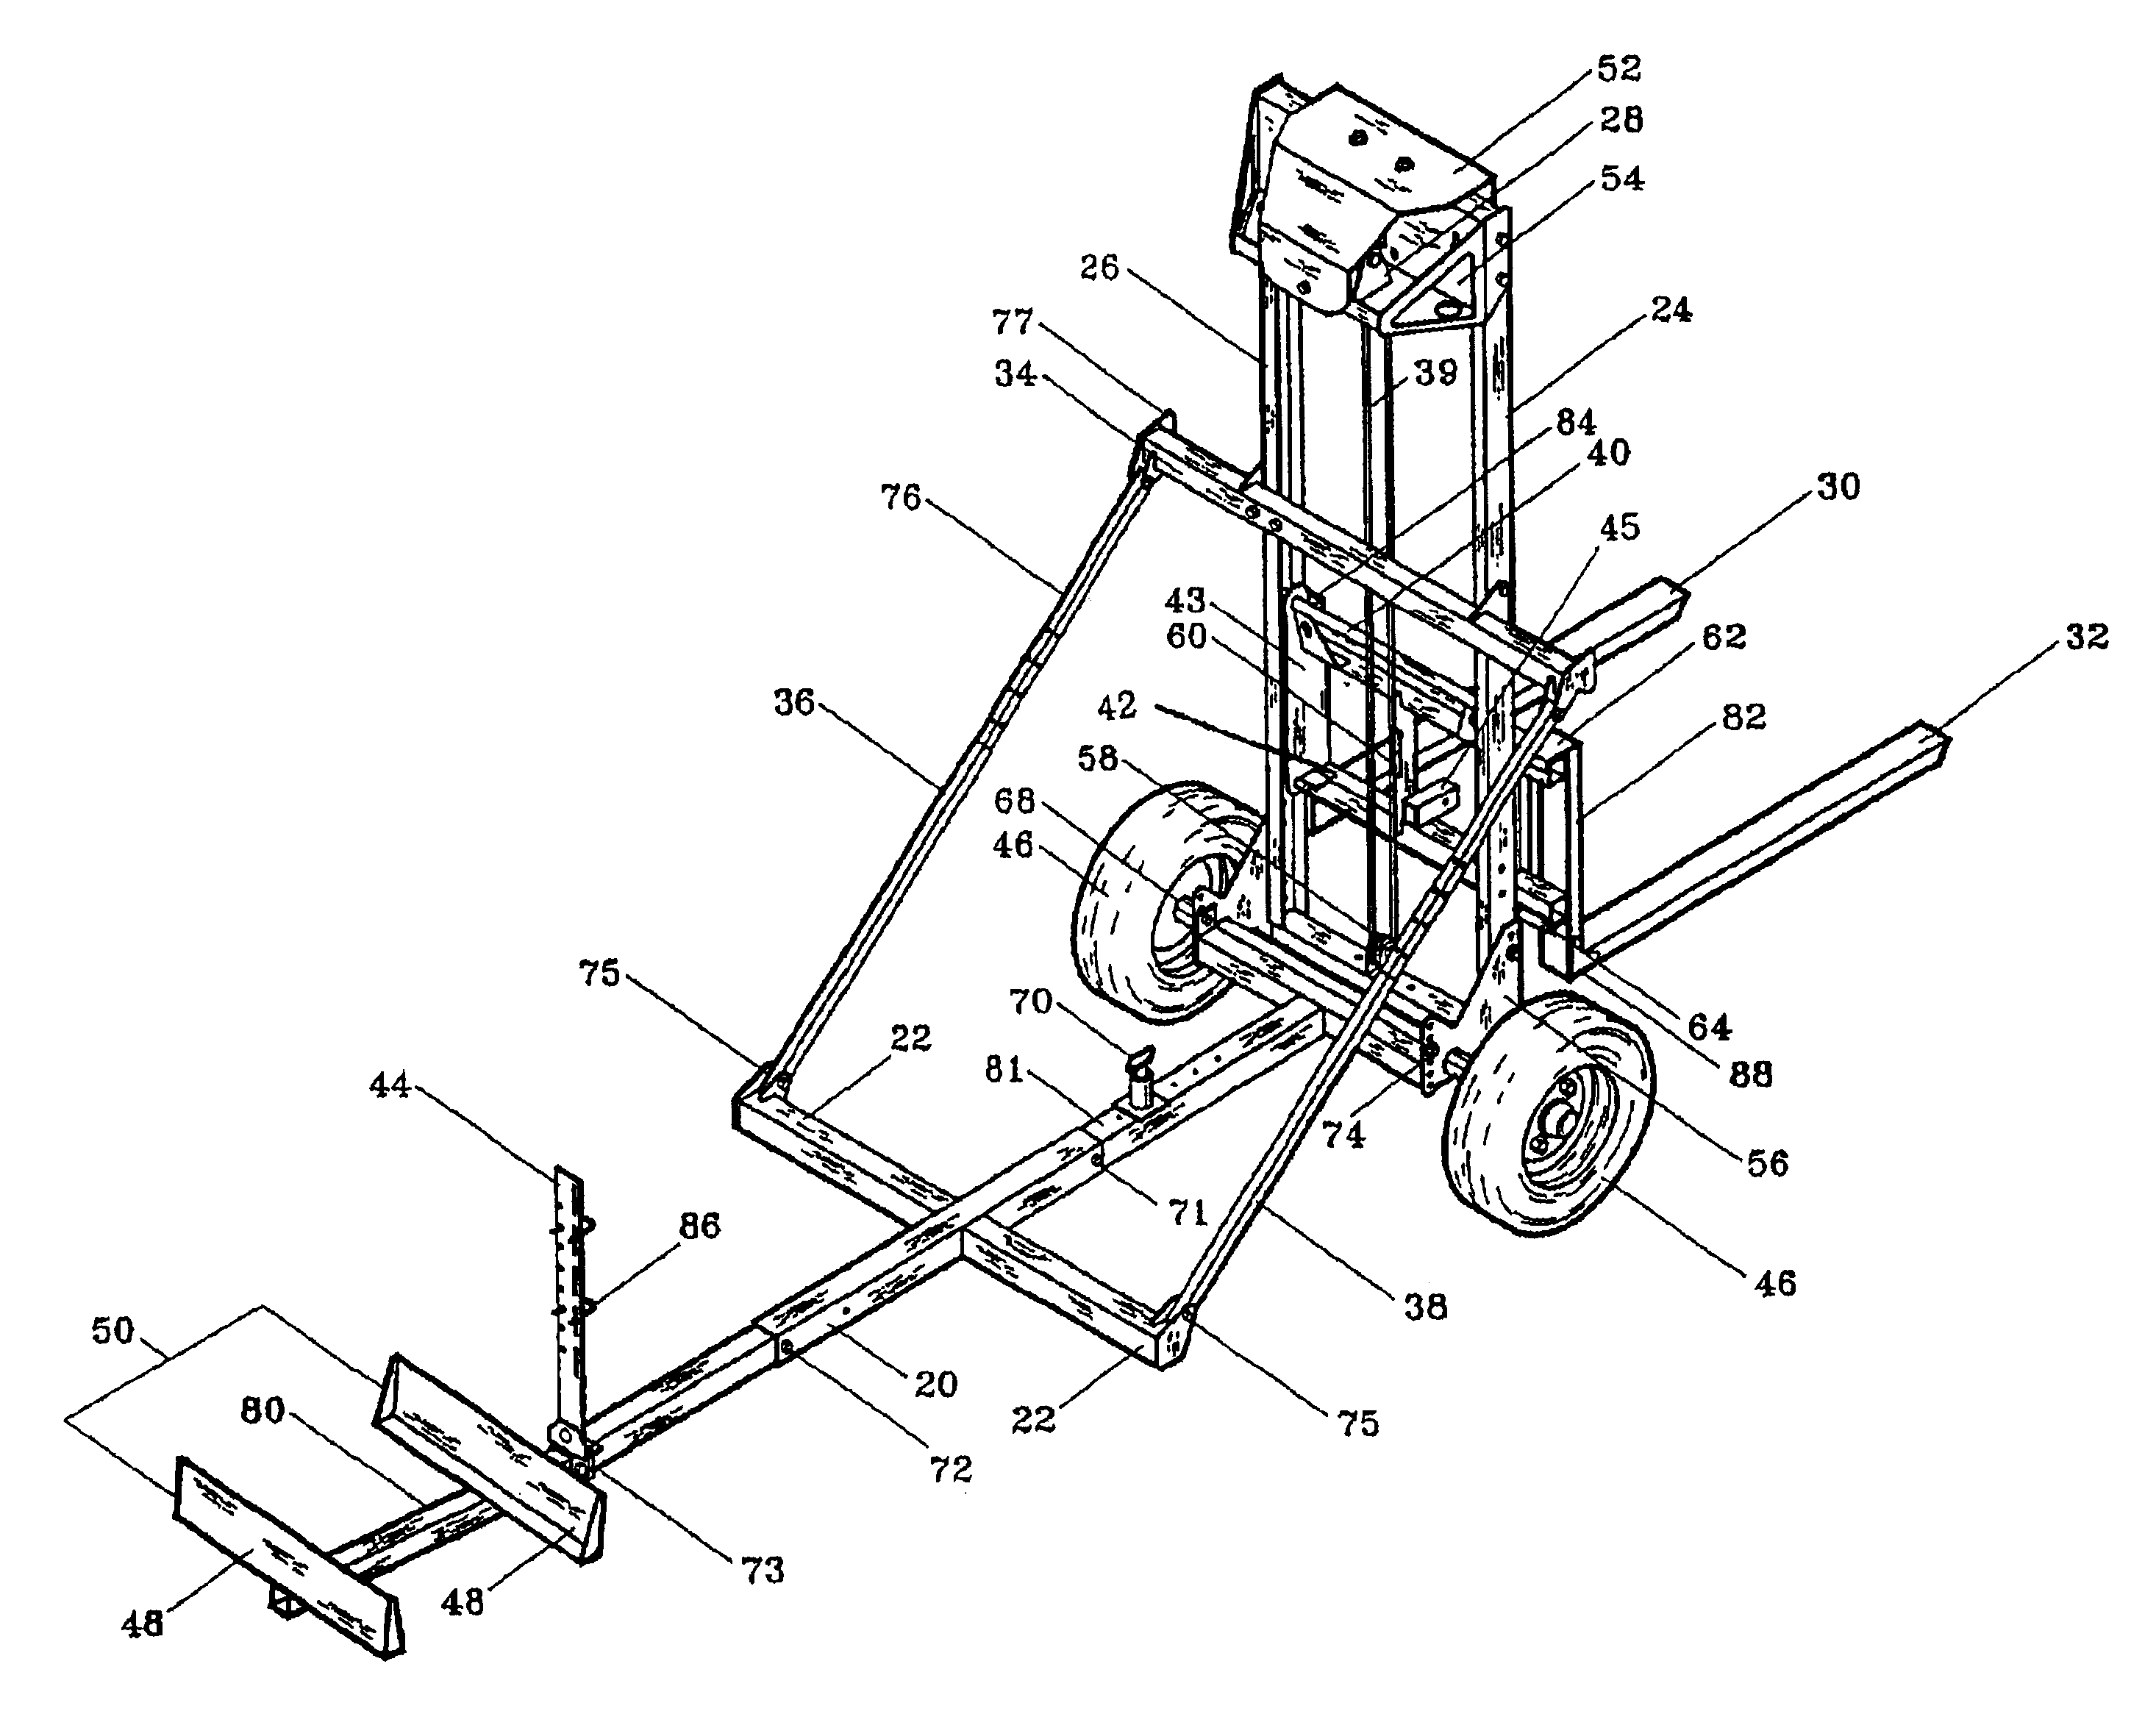 Multi-purpose load bearing assembly for all terrain vehicle (ATV)